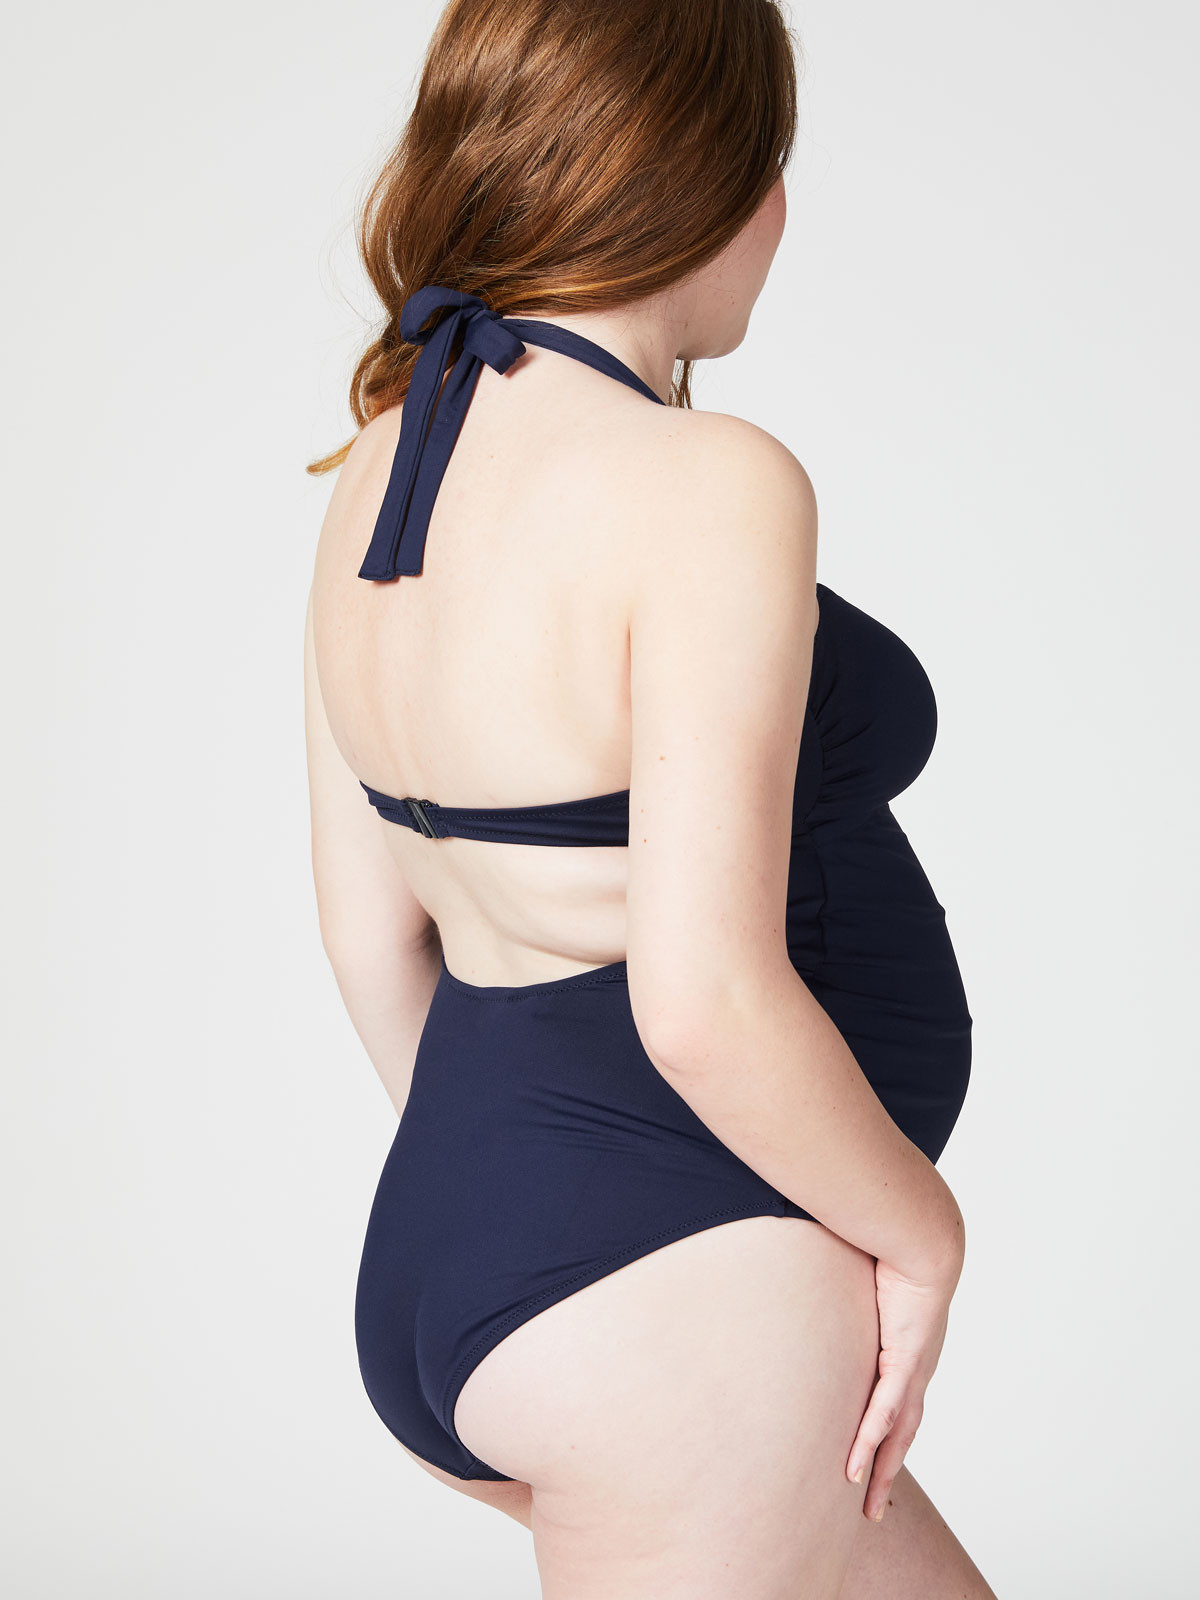 Buy Maternity One Piece Swimsuits - Shop Online